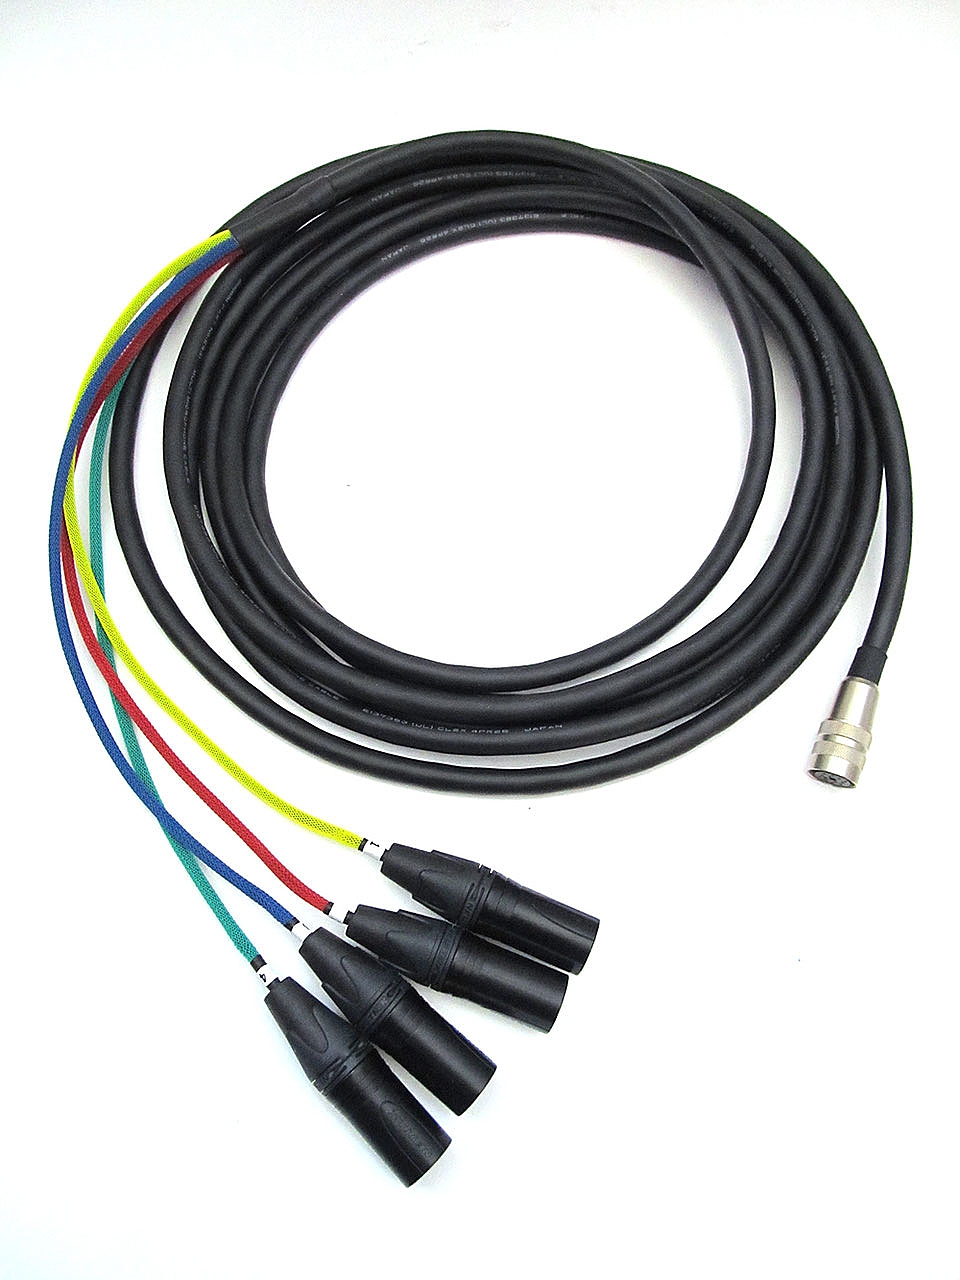 OPS - Ambeo break-out cable